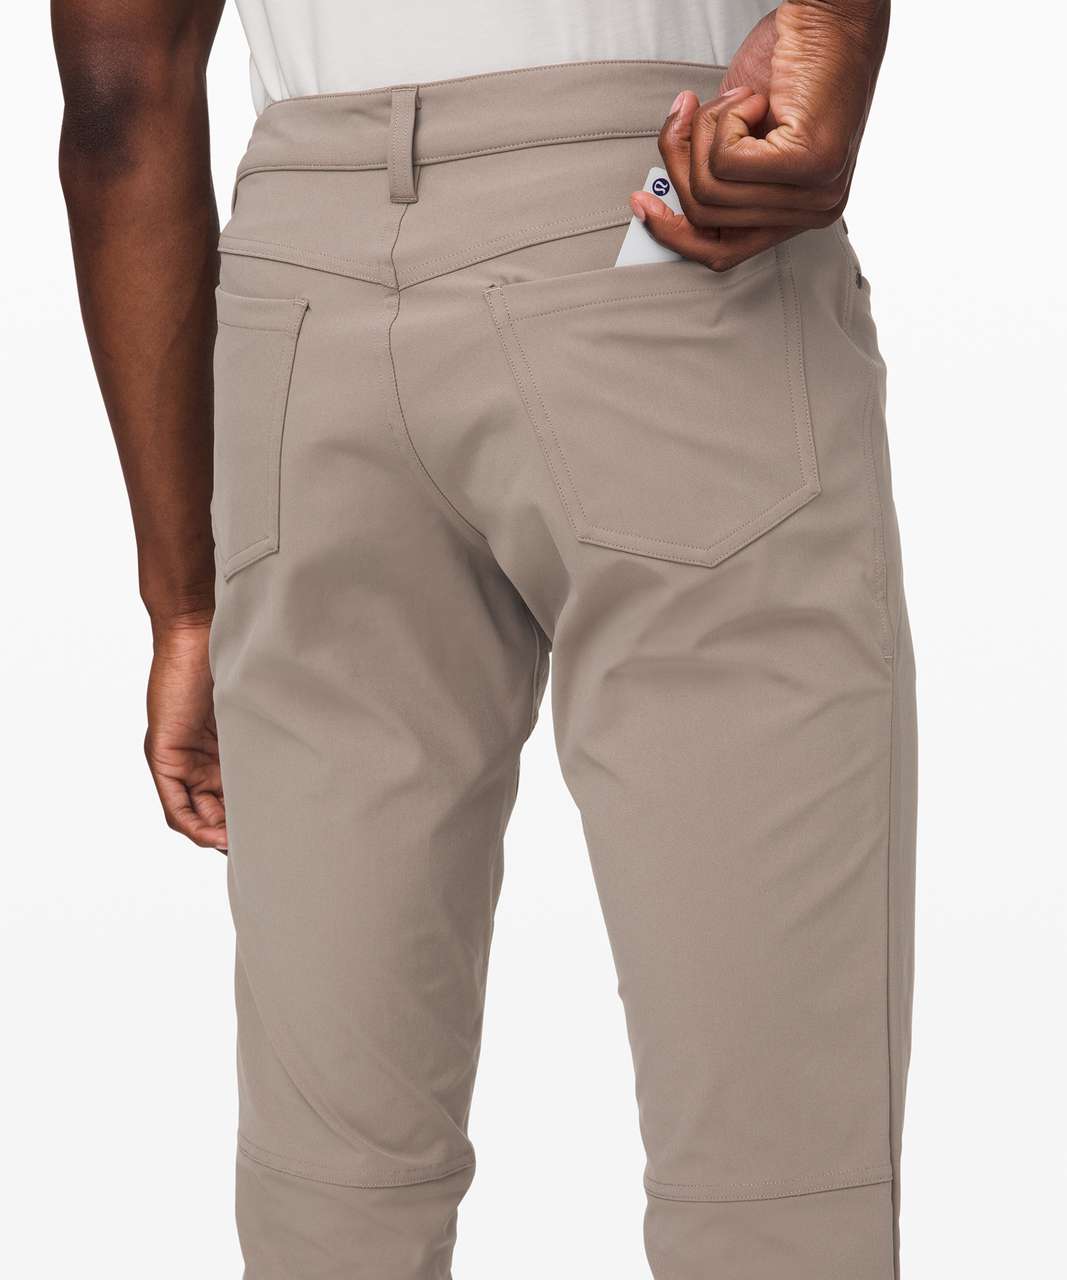 Loved my first pair of ABC Slim pants (Trench) so much that I had to get a  second (Carbon Dust)! Already thinking about a third. These are my first  Lulu products ever.